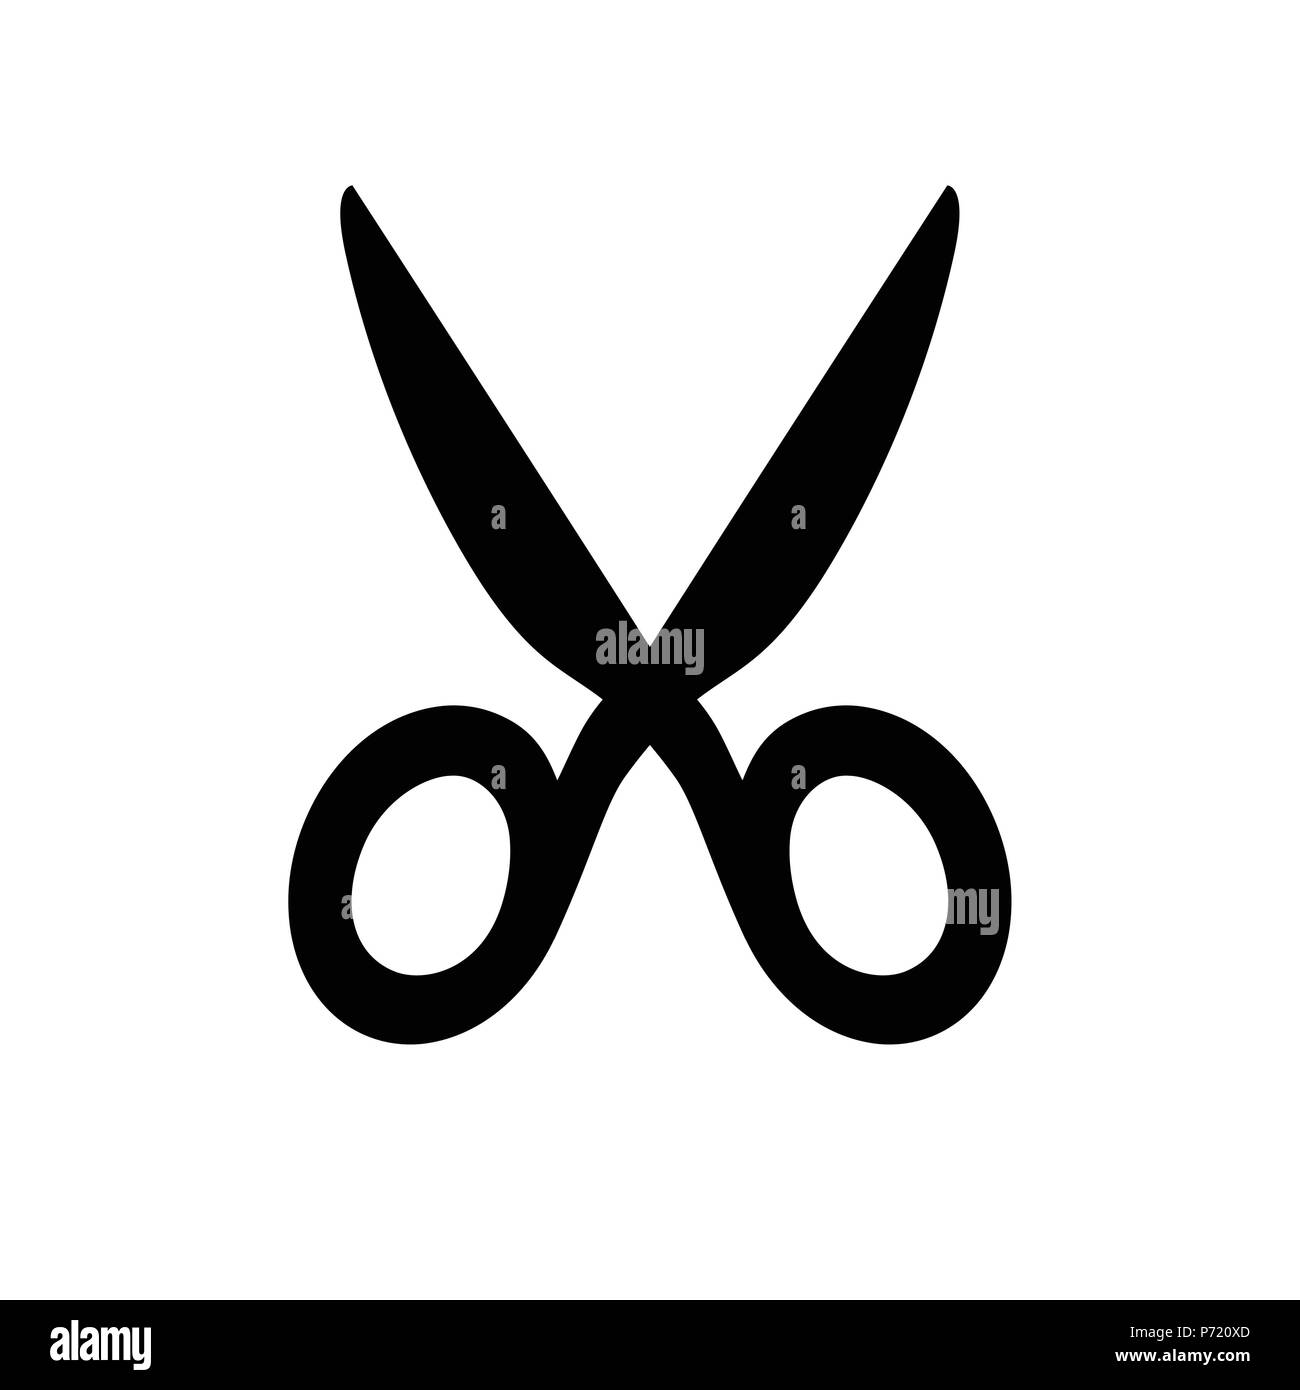 Scissors silhouette icon. Black and white vector illustration on isolated background No.1 Stock Vector